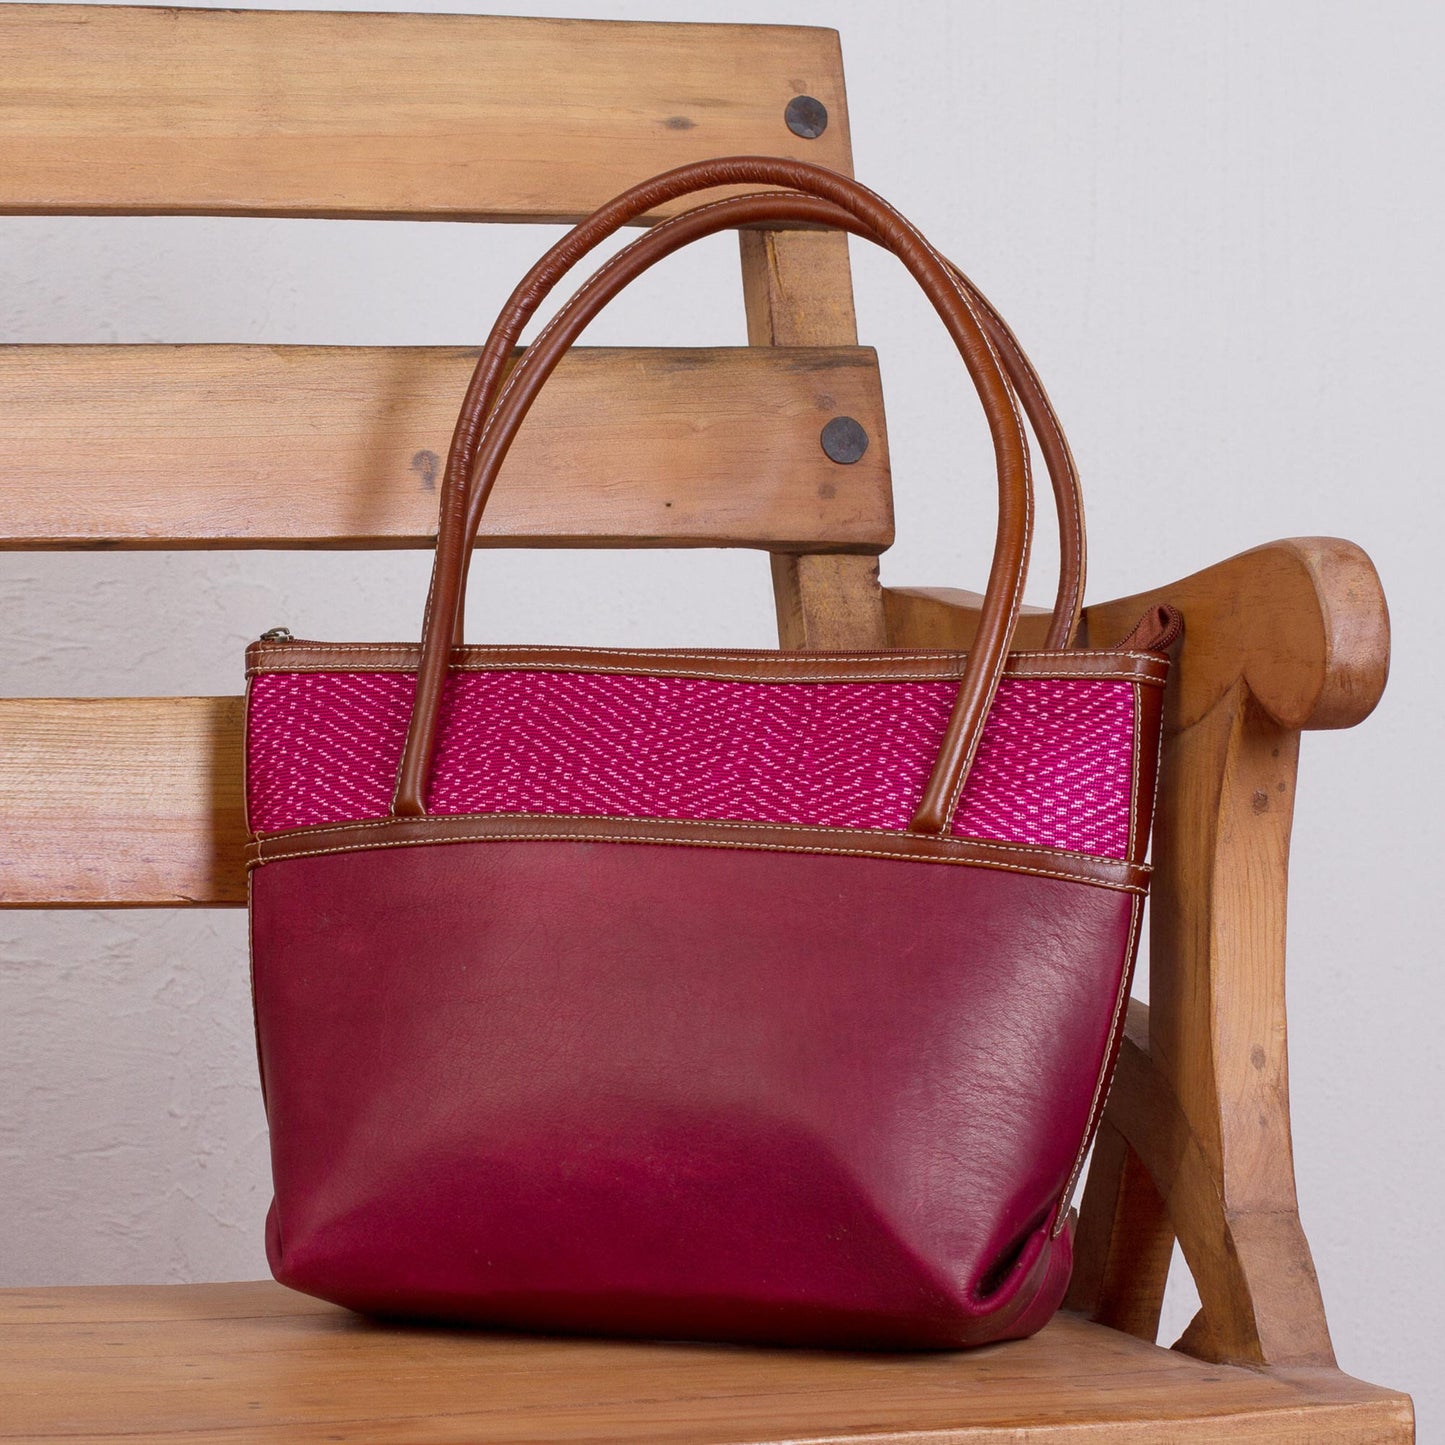 'Maroon Intersection' Handcrafted Leather and Palm Shoulder Bag